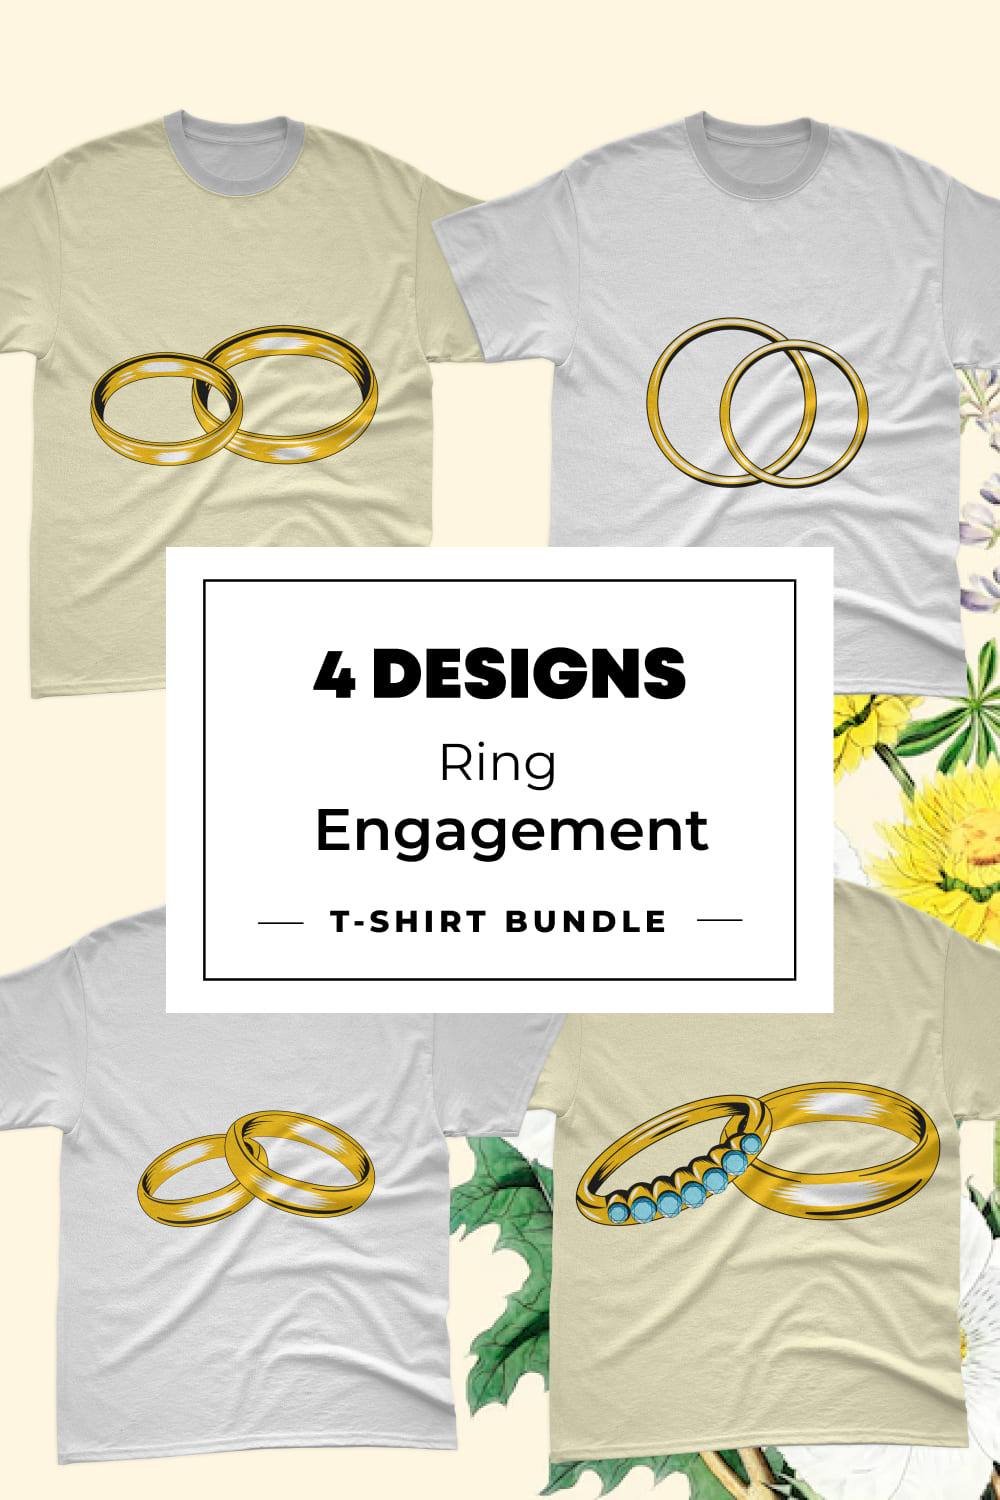 A set of images of t-shirts with amazing prints of engagement rings.